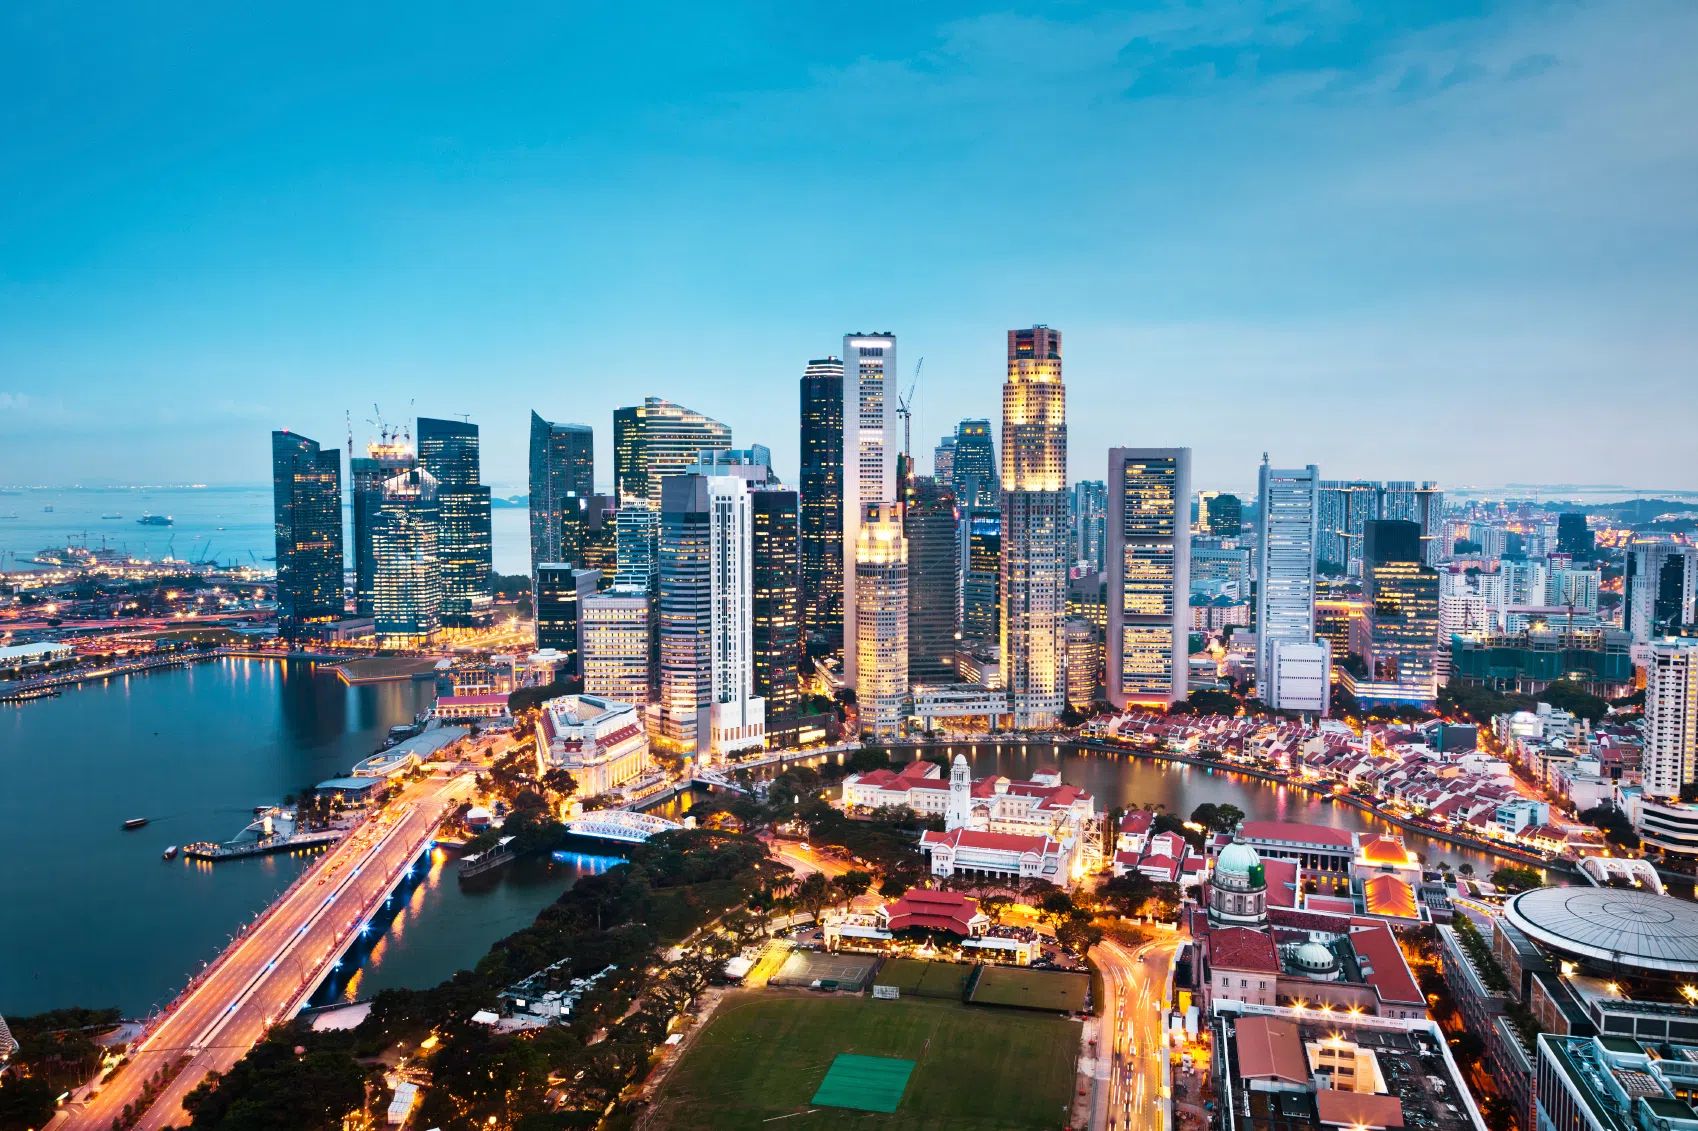 Singapore: History And The Future